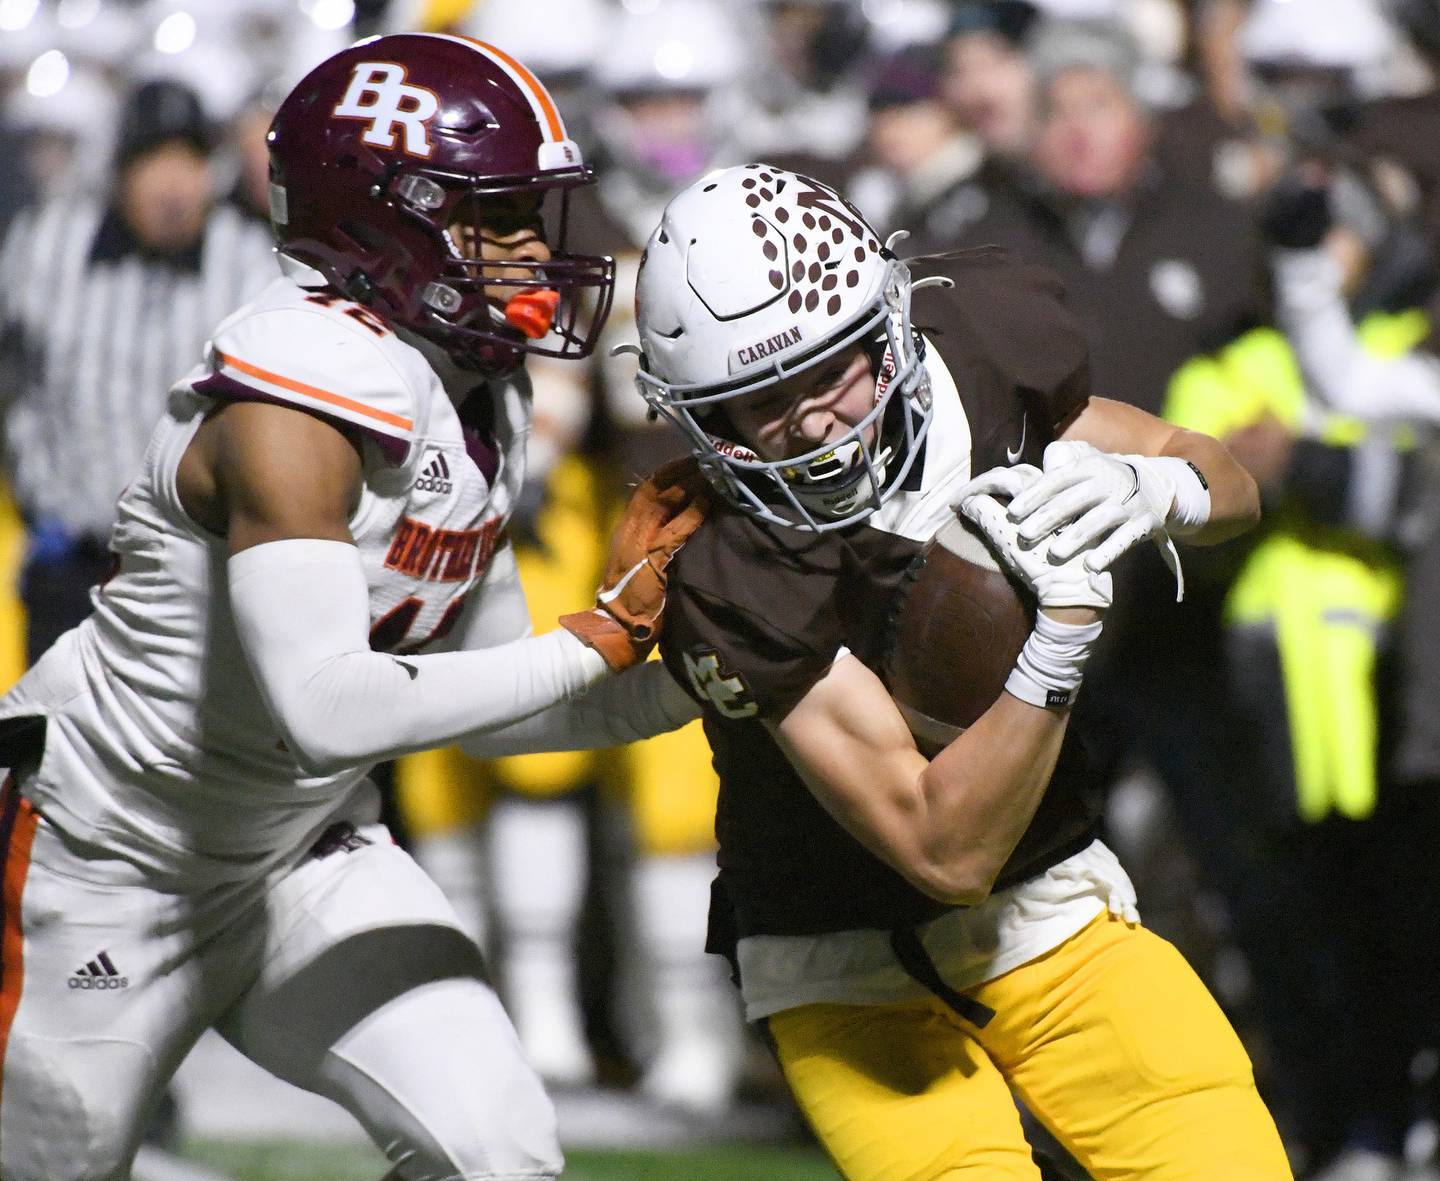 Mount Carmel's Jimmy Deacy, right, gets pushed out of bounds by Brother Rice's Sidney Green after making a catch during a Class 7A state quarterfinal game in Chicago on Saturday, Nov. 12, 2022.